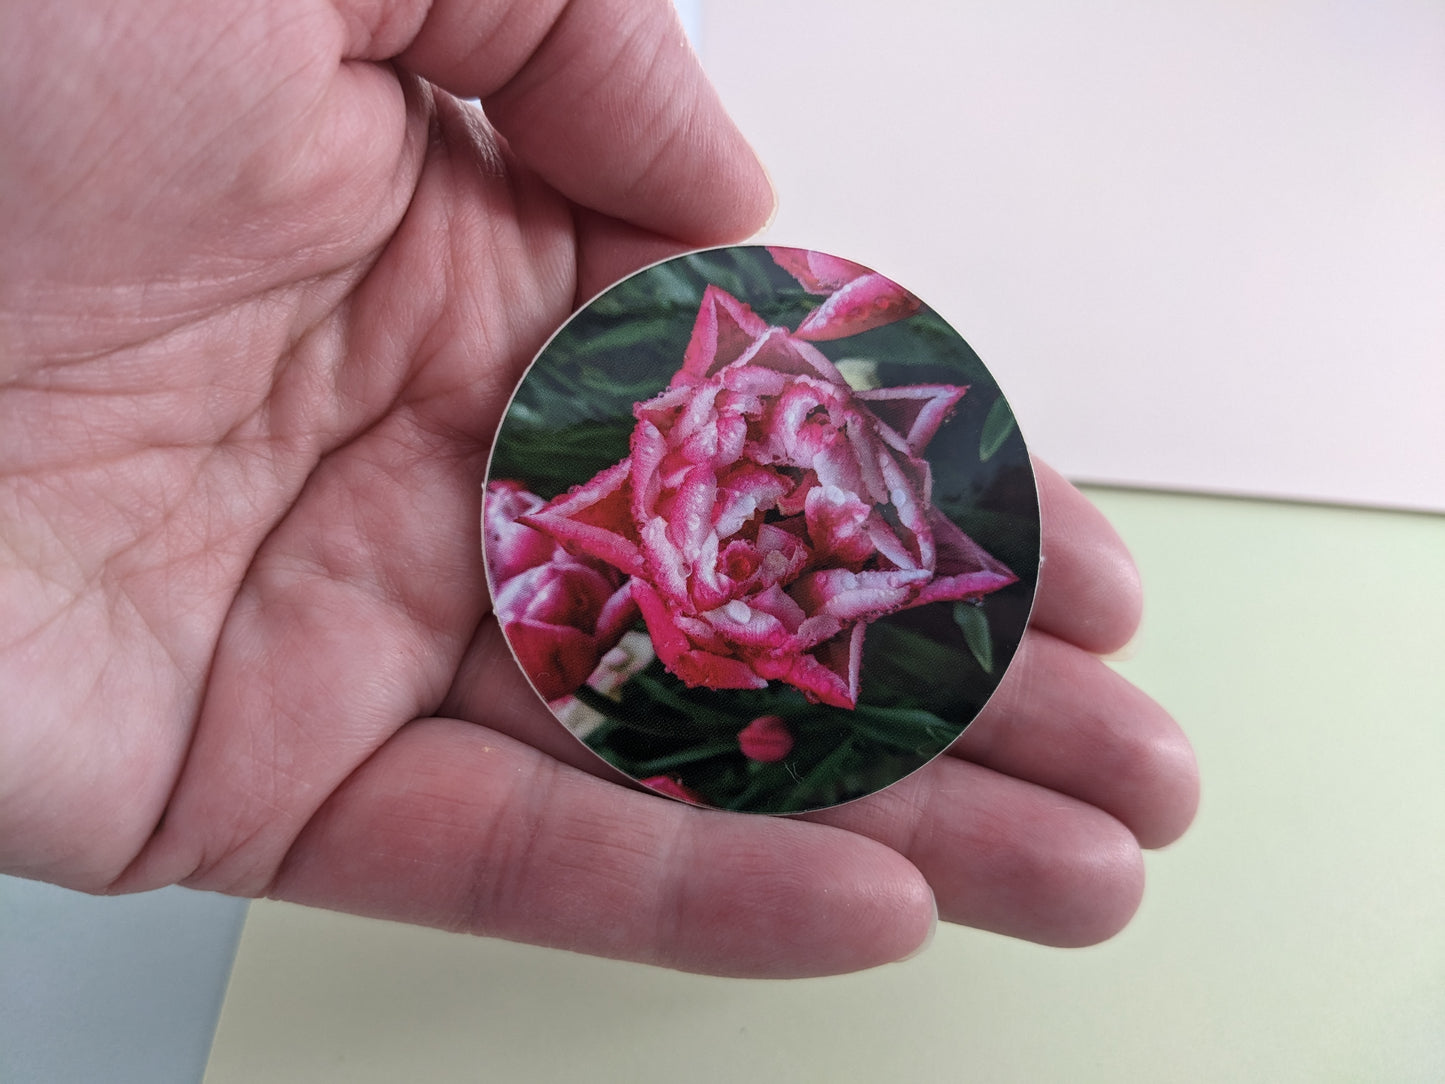 Pink and White Double Tulip 2 in. Sticker